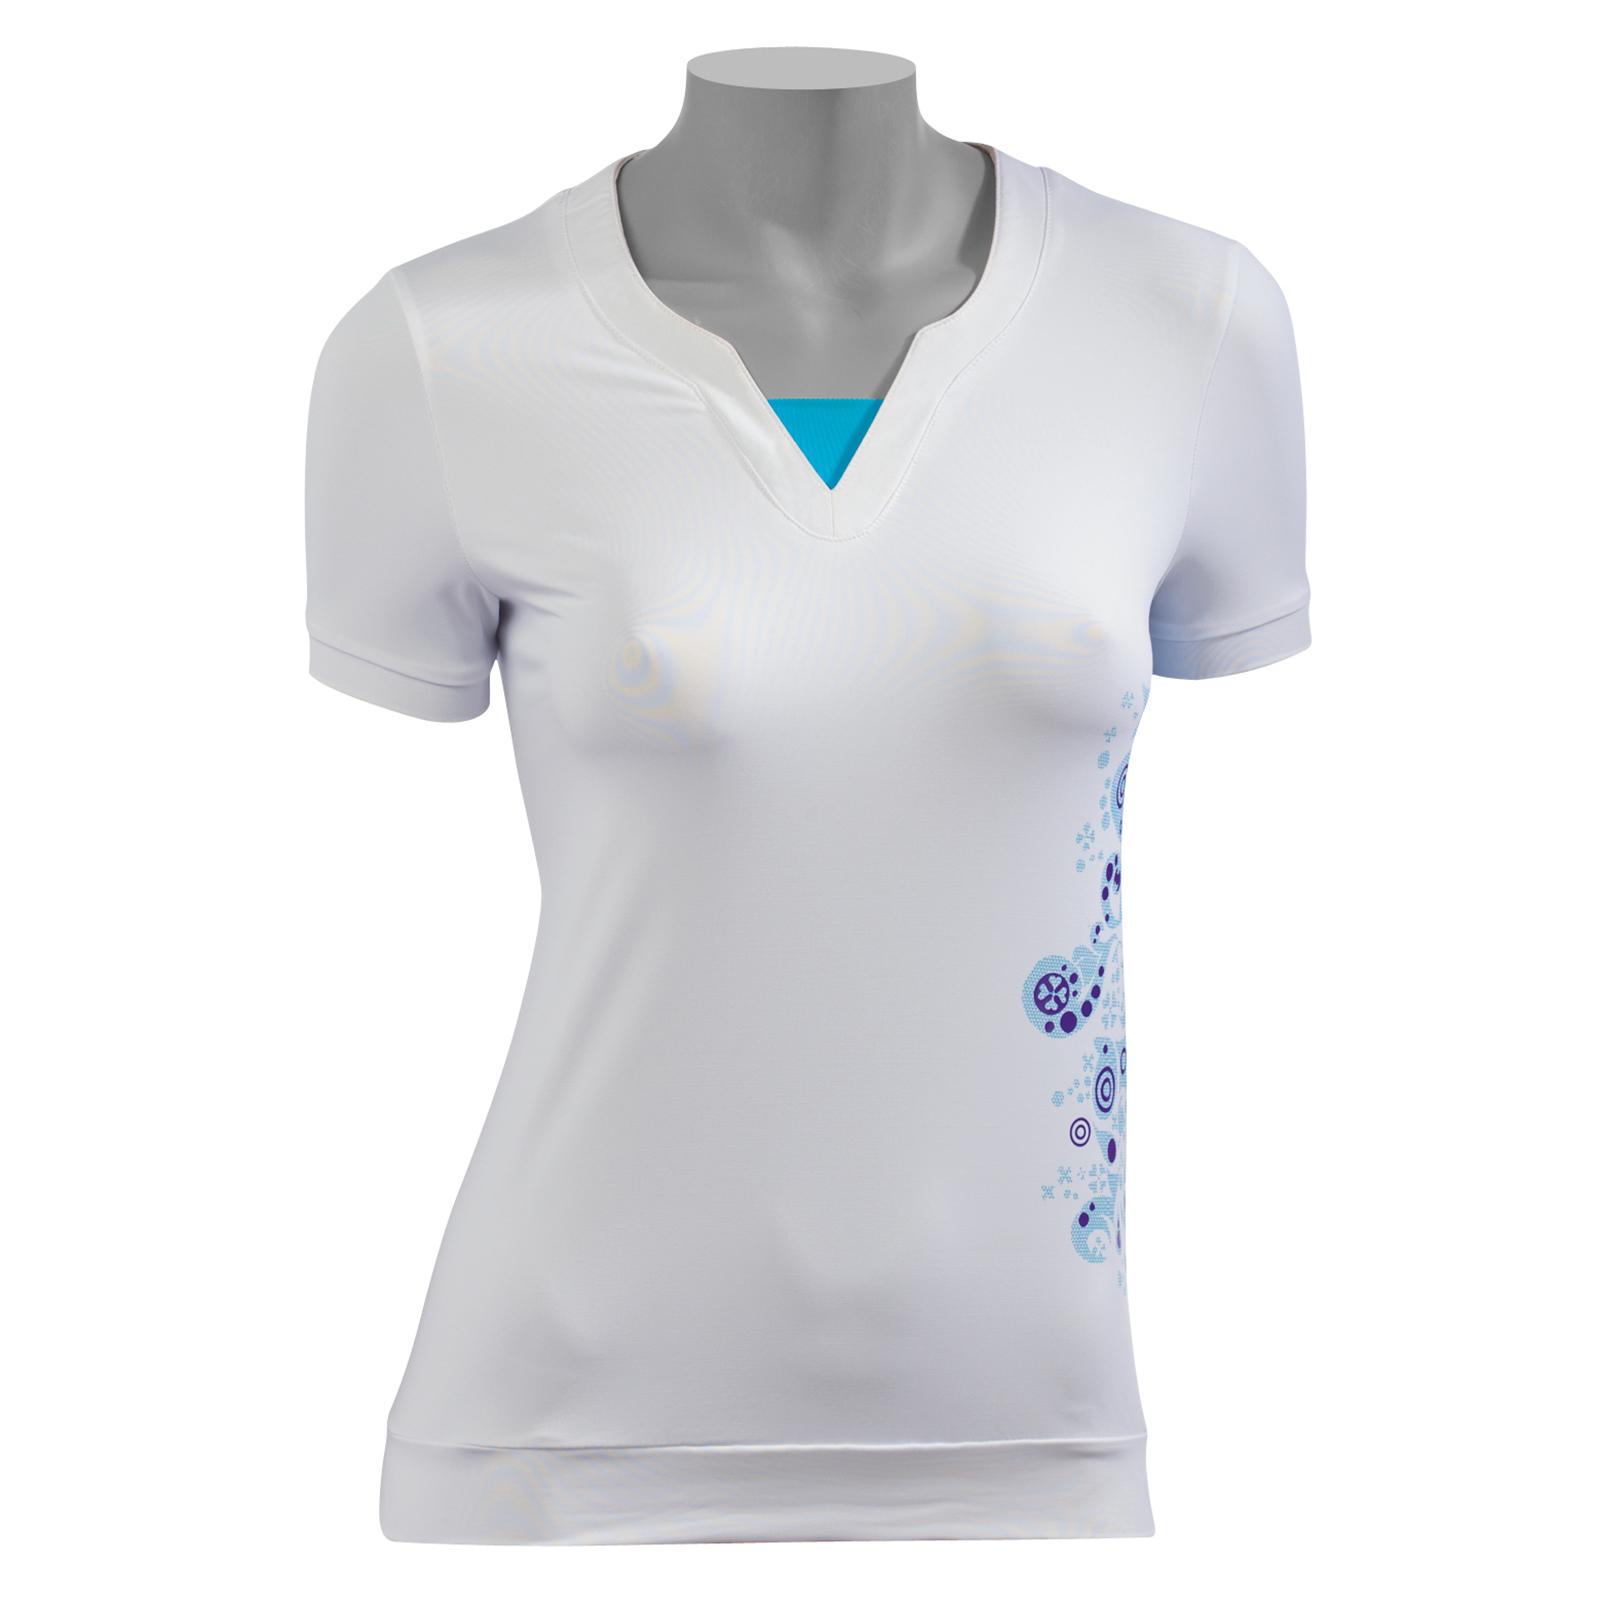 Foto Maillot para ciclismo Northwave Fizz Graphic blanco para mujer , m foto 581058